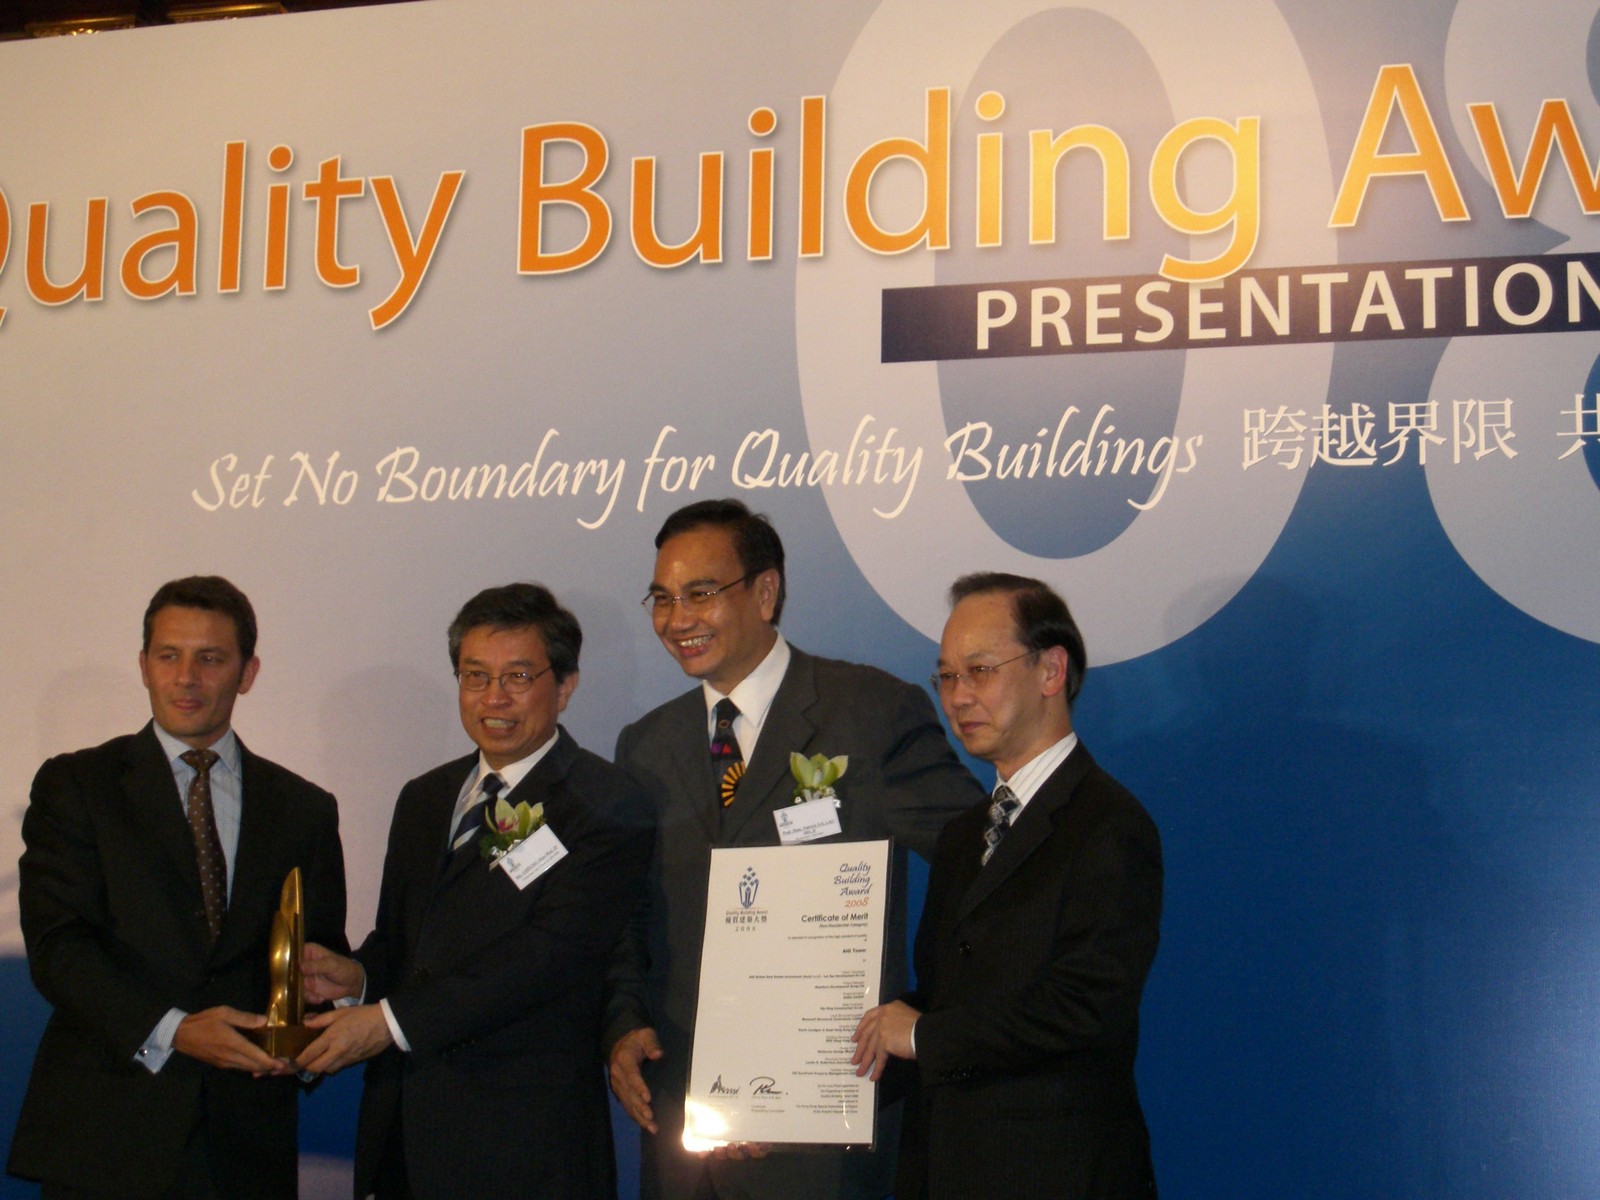 Dr. Tong Yuk-lun (Right 1), Managing Director of Hip Hing Construction Co. Ltd. receives the awards